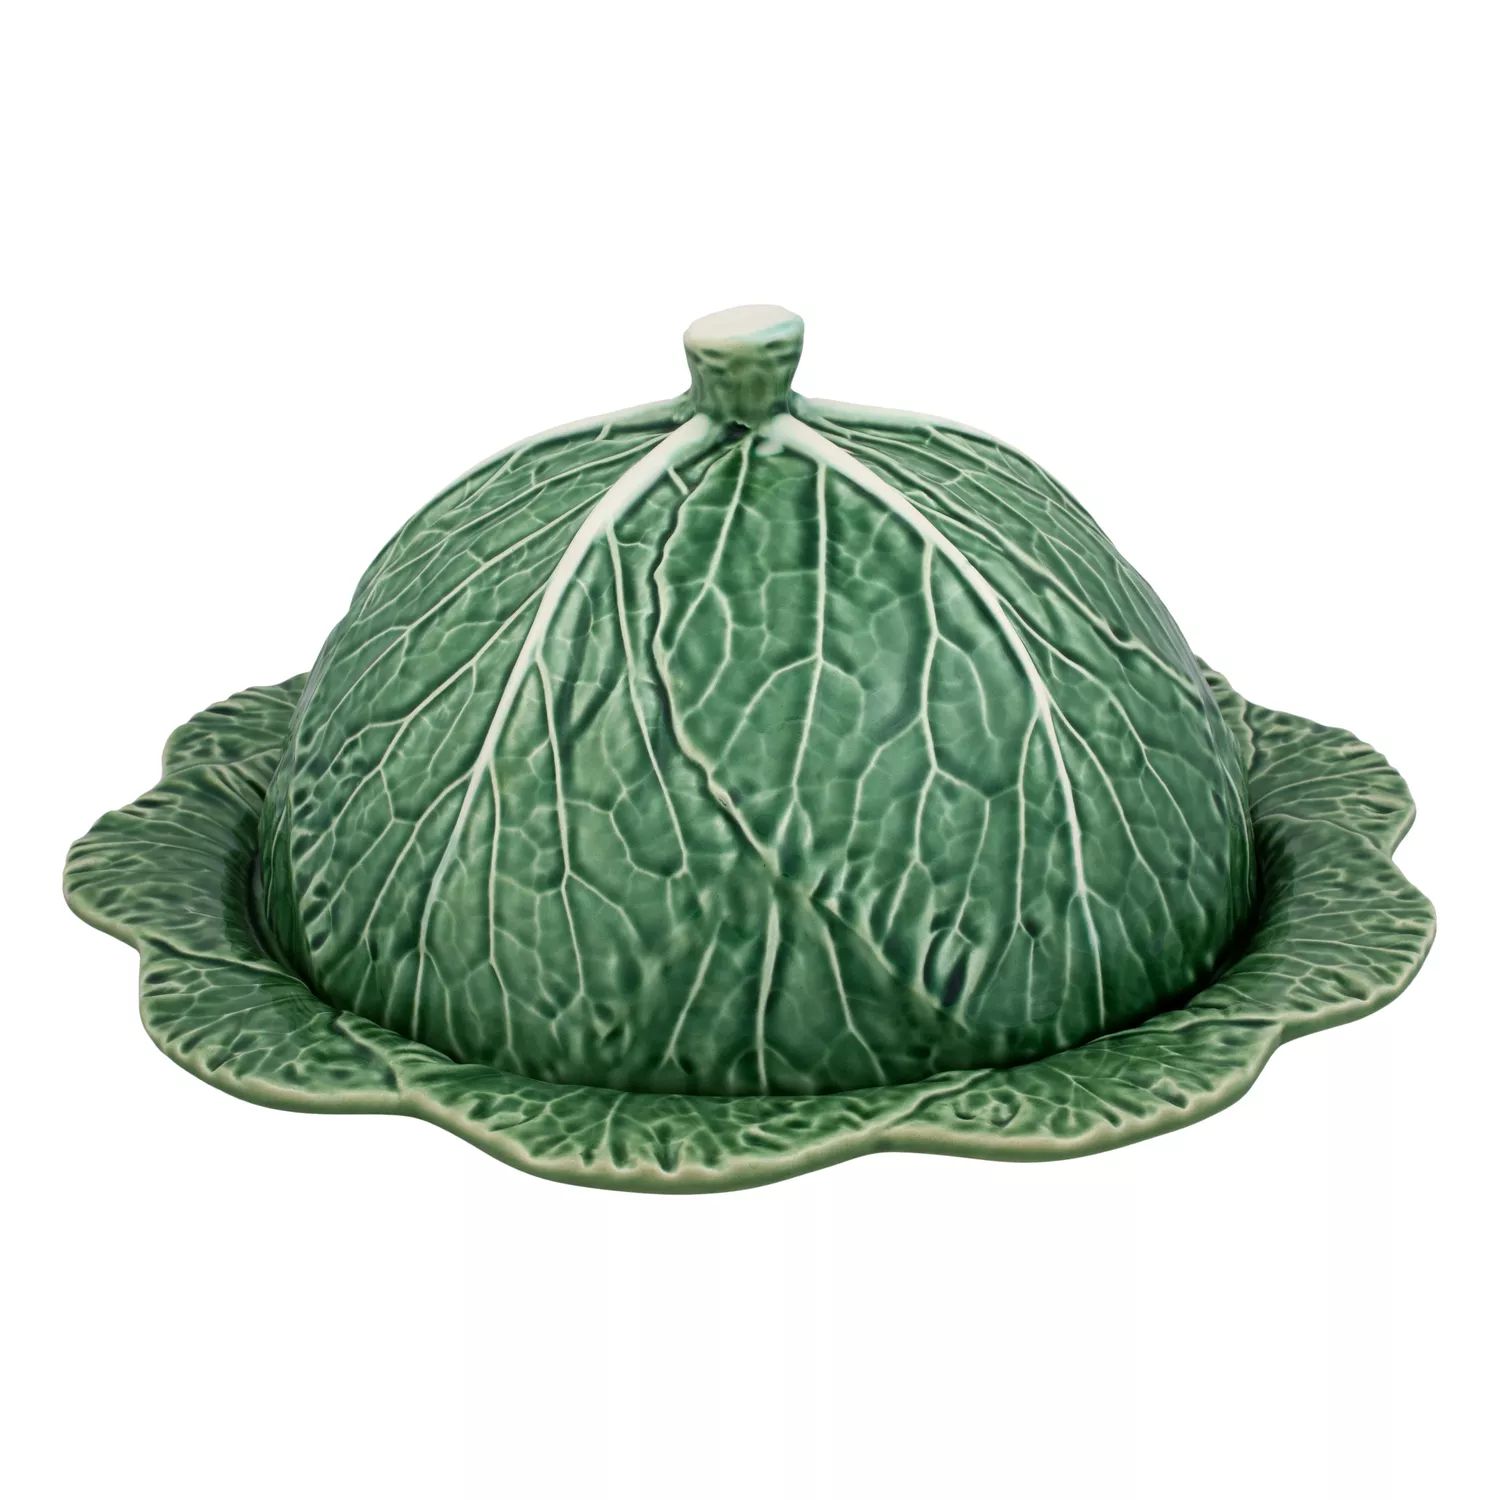 Bordallo Pinheiro Cabbage Cheese Tray with Lid | Sur La Table